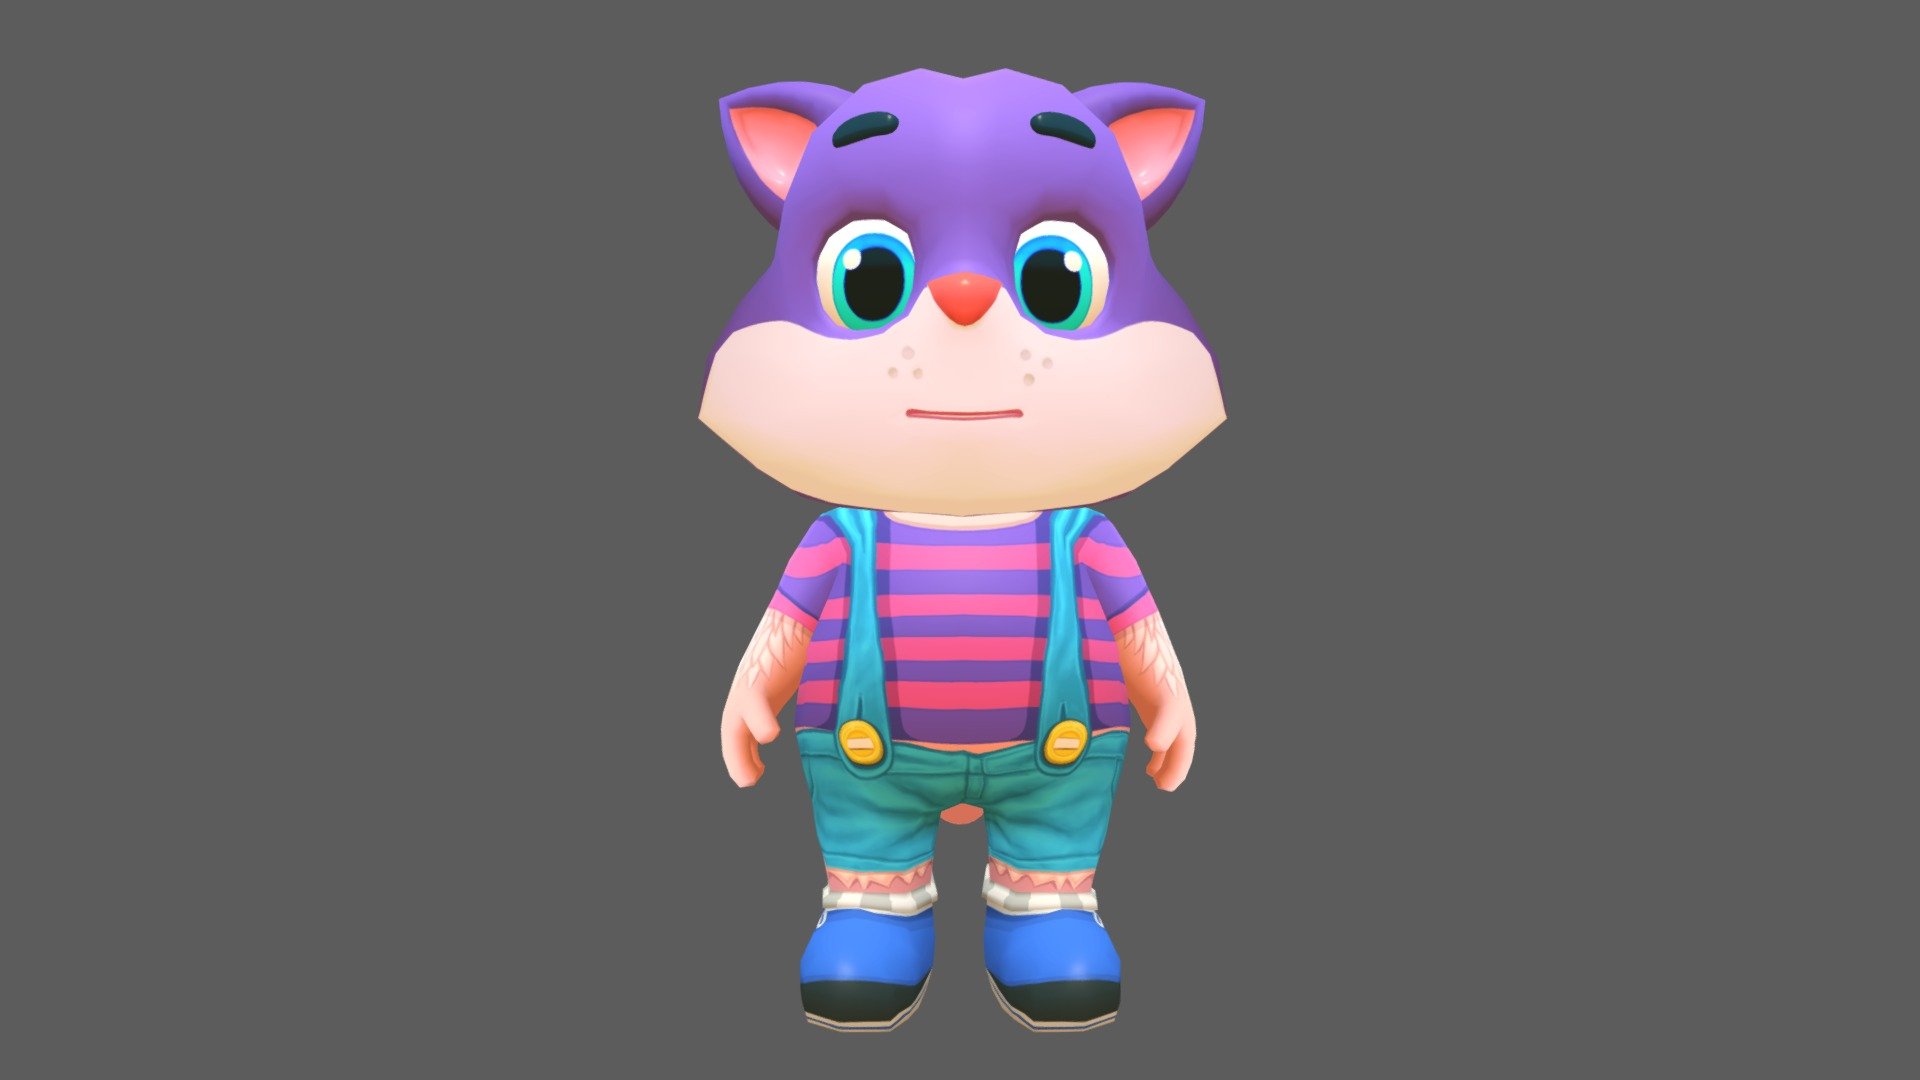 Cat Kitty character for games and animations. The model is game ready and compatible with game engines.

The model is low poly with four texture resolutions 4096x4096, 2048x2048, 1024x1024 &amp; 512x512.

Included Files:




Maya (.ma, .mb) - 2015 - 2019

FBX - 2014 - 2019

OBJ

The package includes 18 Animations which are as follows:




Run

Idle

Jump

Leap left

Leap right

Skidding

Roll

Crash &amp; Death

Power up

Whirl

Whirl jump

Waving in air

Backwards run

Dizzy

Gum Bubble

Gliding

Waving

Looking behind

The model is fully rigged and can be easily animated in case further animating or modification is required.

The model is game ready at:




3632 Polygons

3620 Vertices

The model is UV mapped with non-overlapping UV's. The shadows and lights are baked in the texture, although you can add more lights and shadows for rendering and use it as you please 3d model